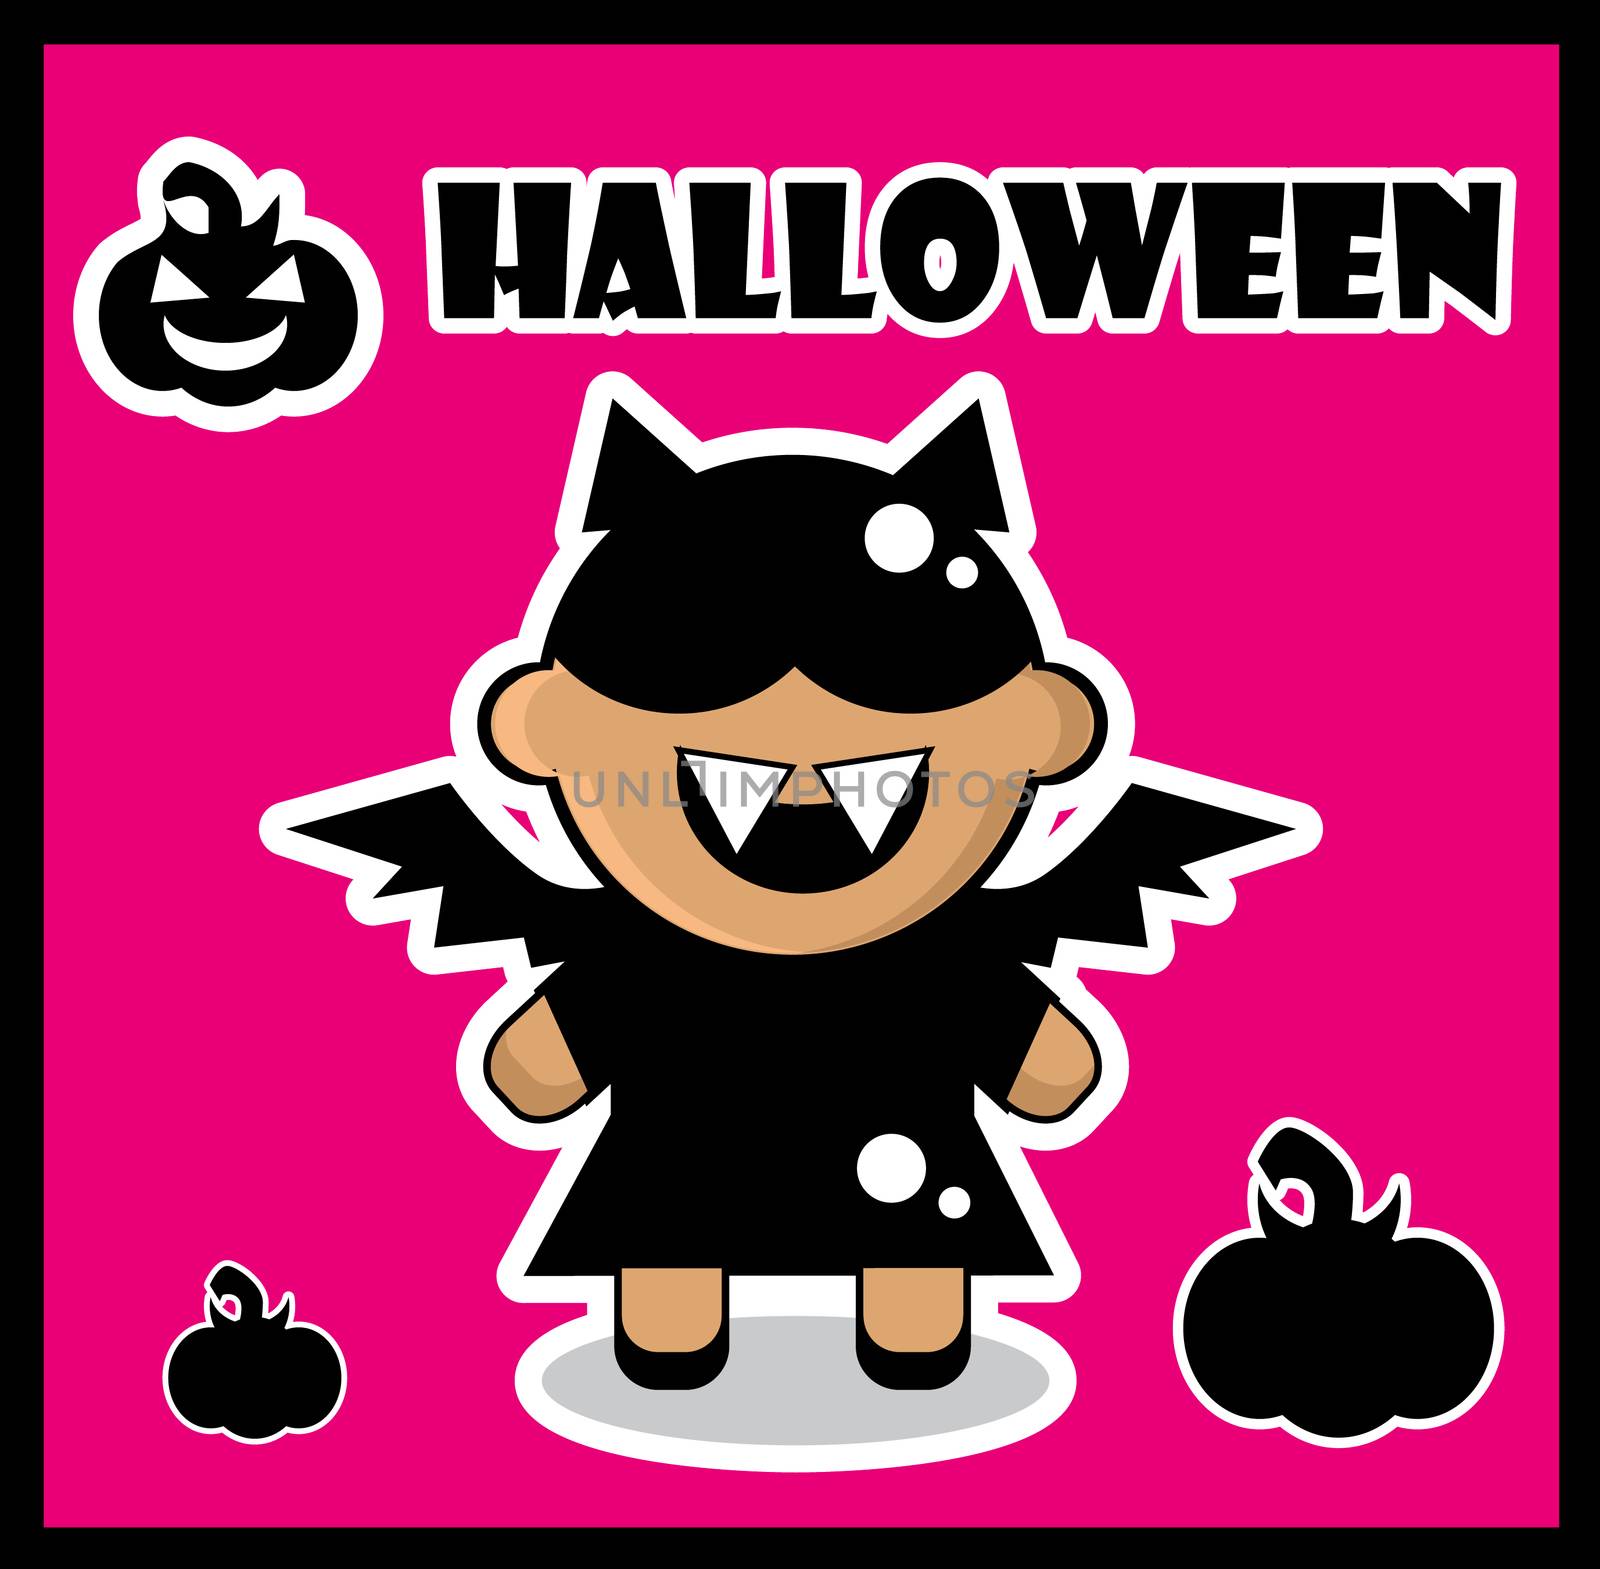 Halloween icon Bat card poster background silhouette of bat girl and pumpkin